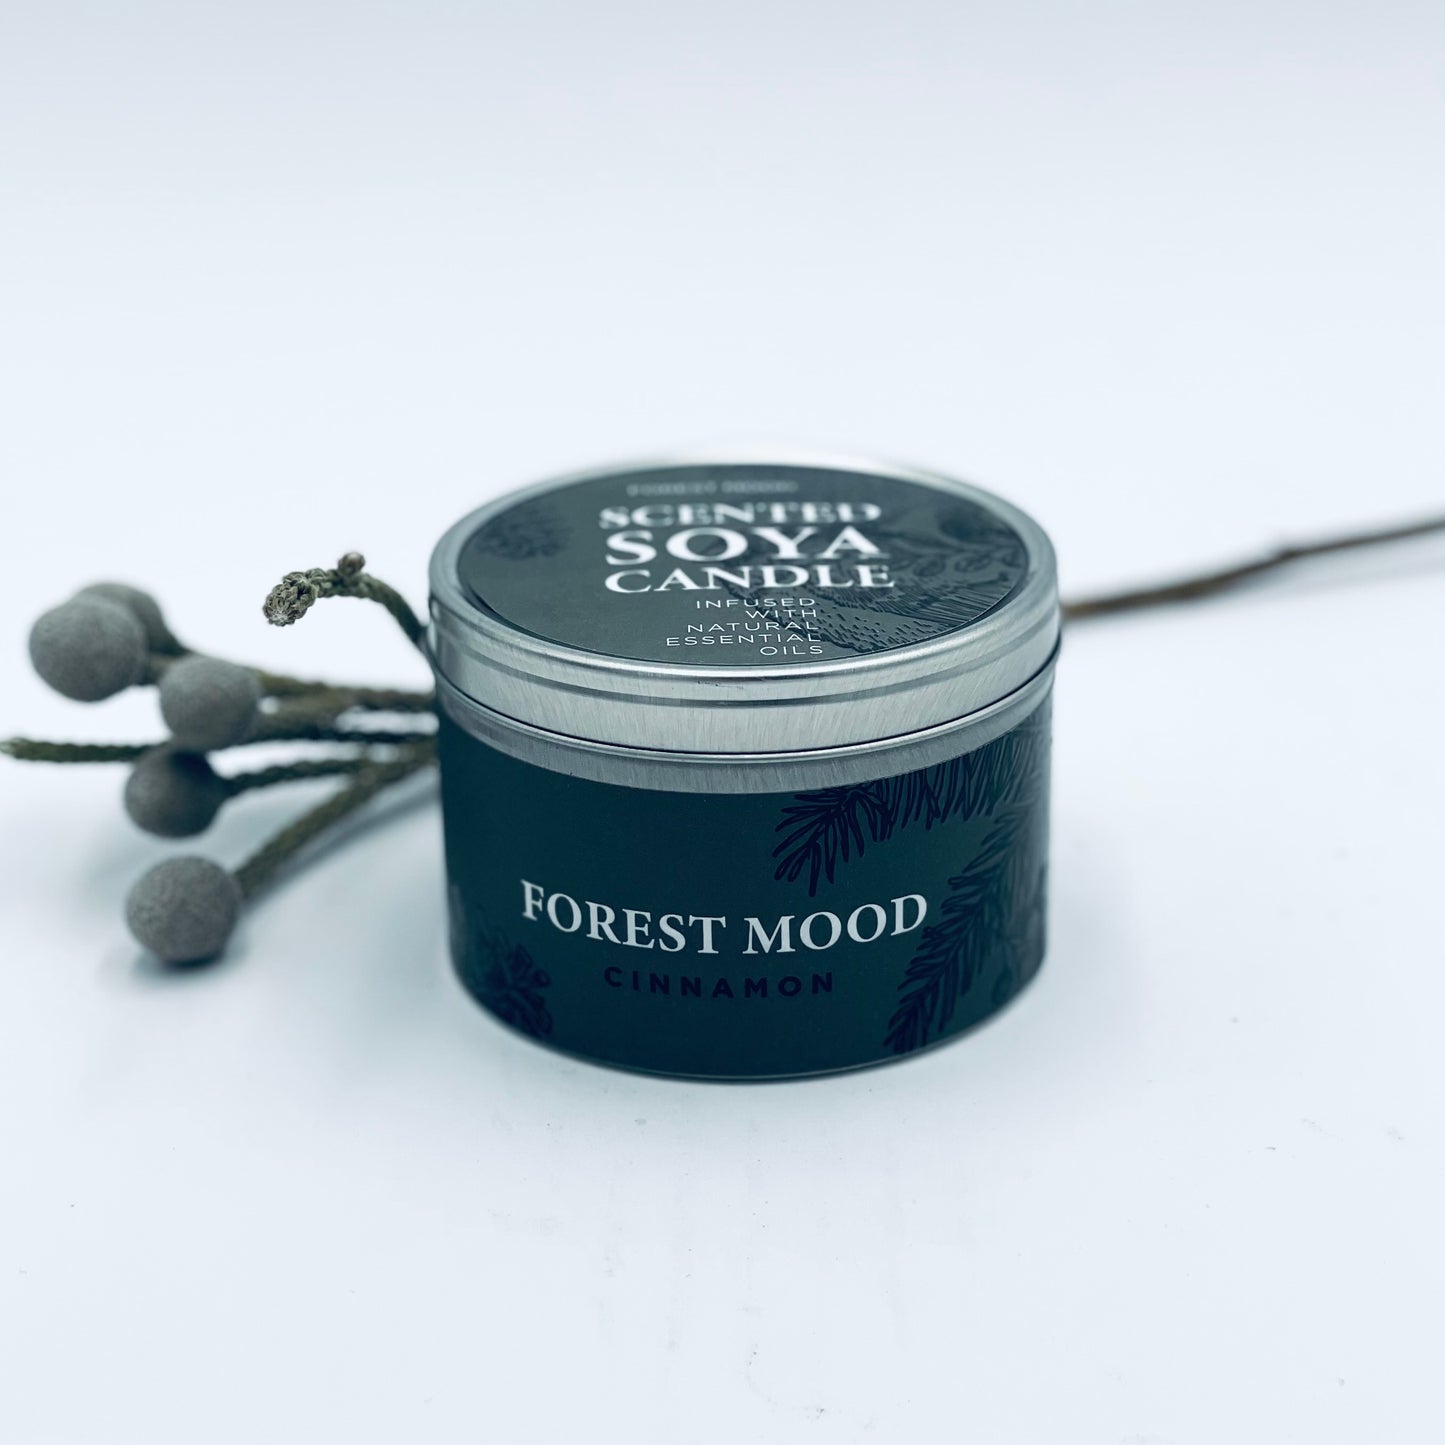 Natural soy wax candle "FOREST MOOD" with Cinnamon scent